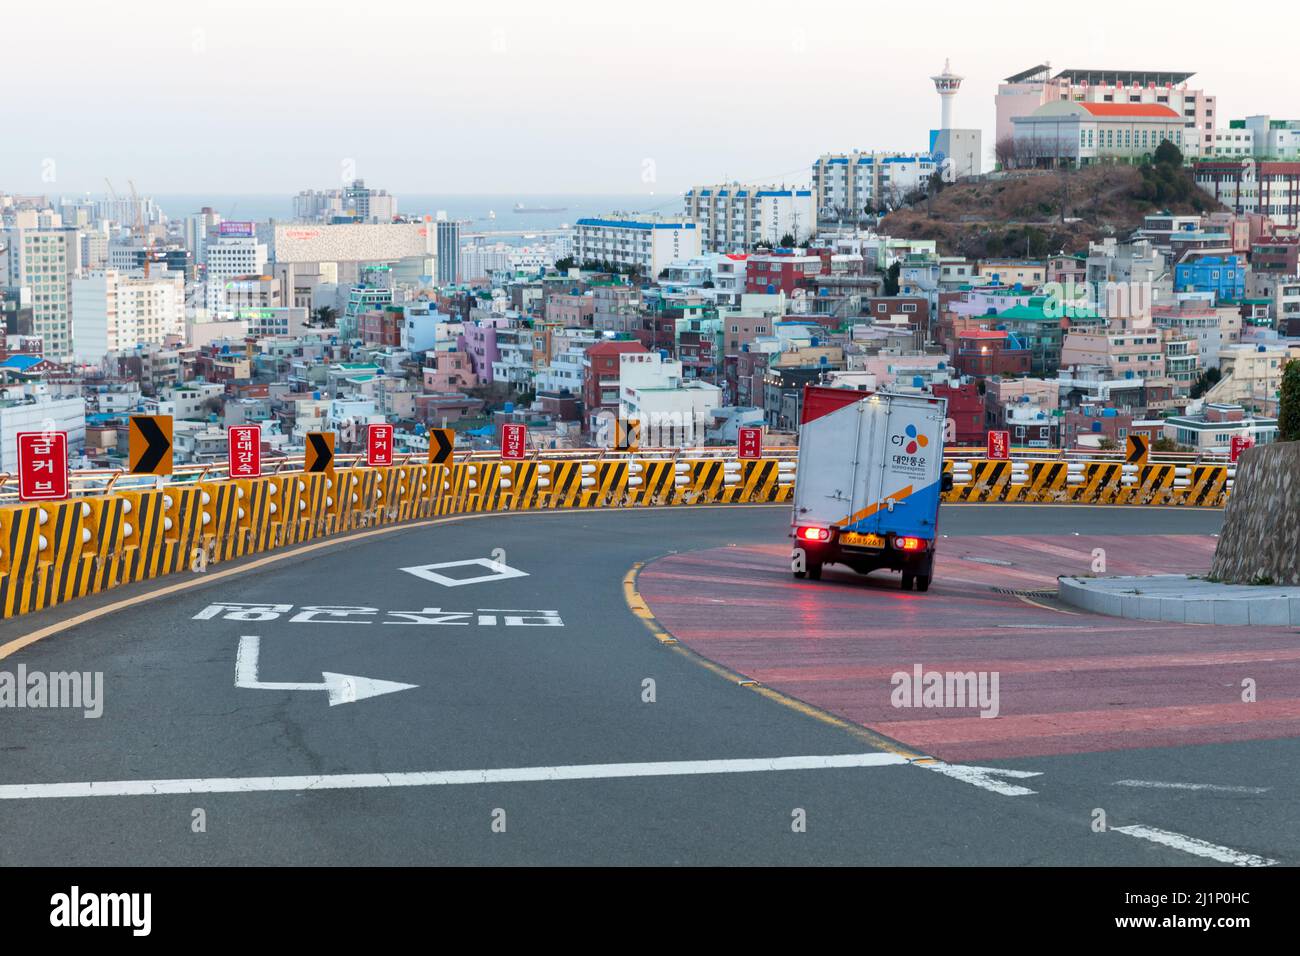 Busan, South Korea - March 13, 2018: Cityscape of Busan, street view with a truck on the road Stock Photo